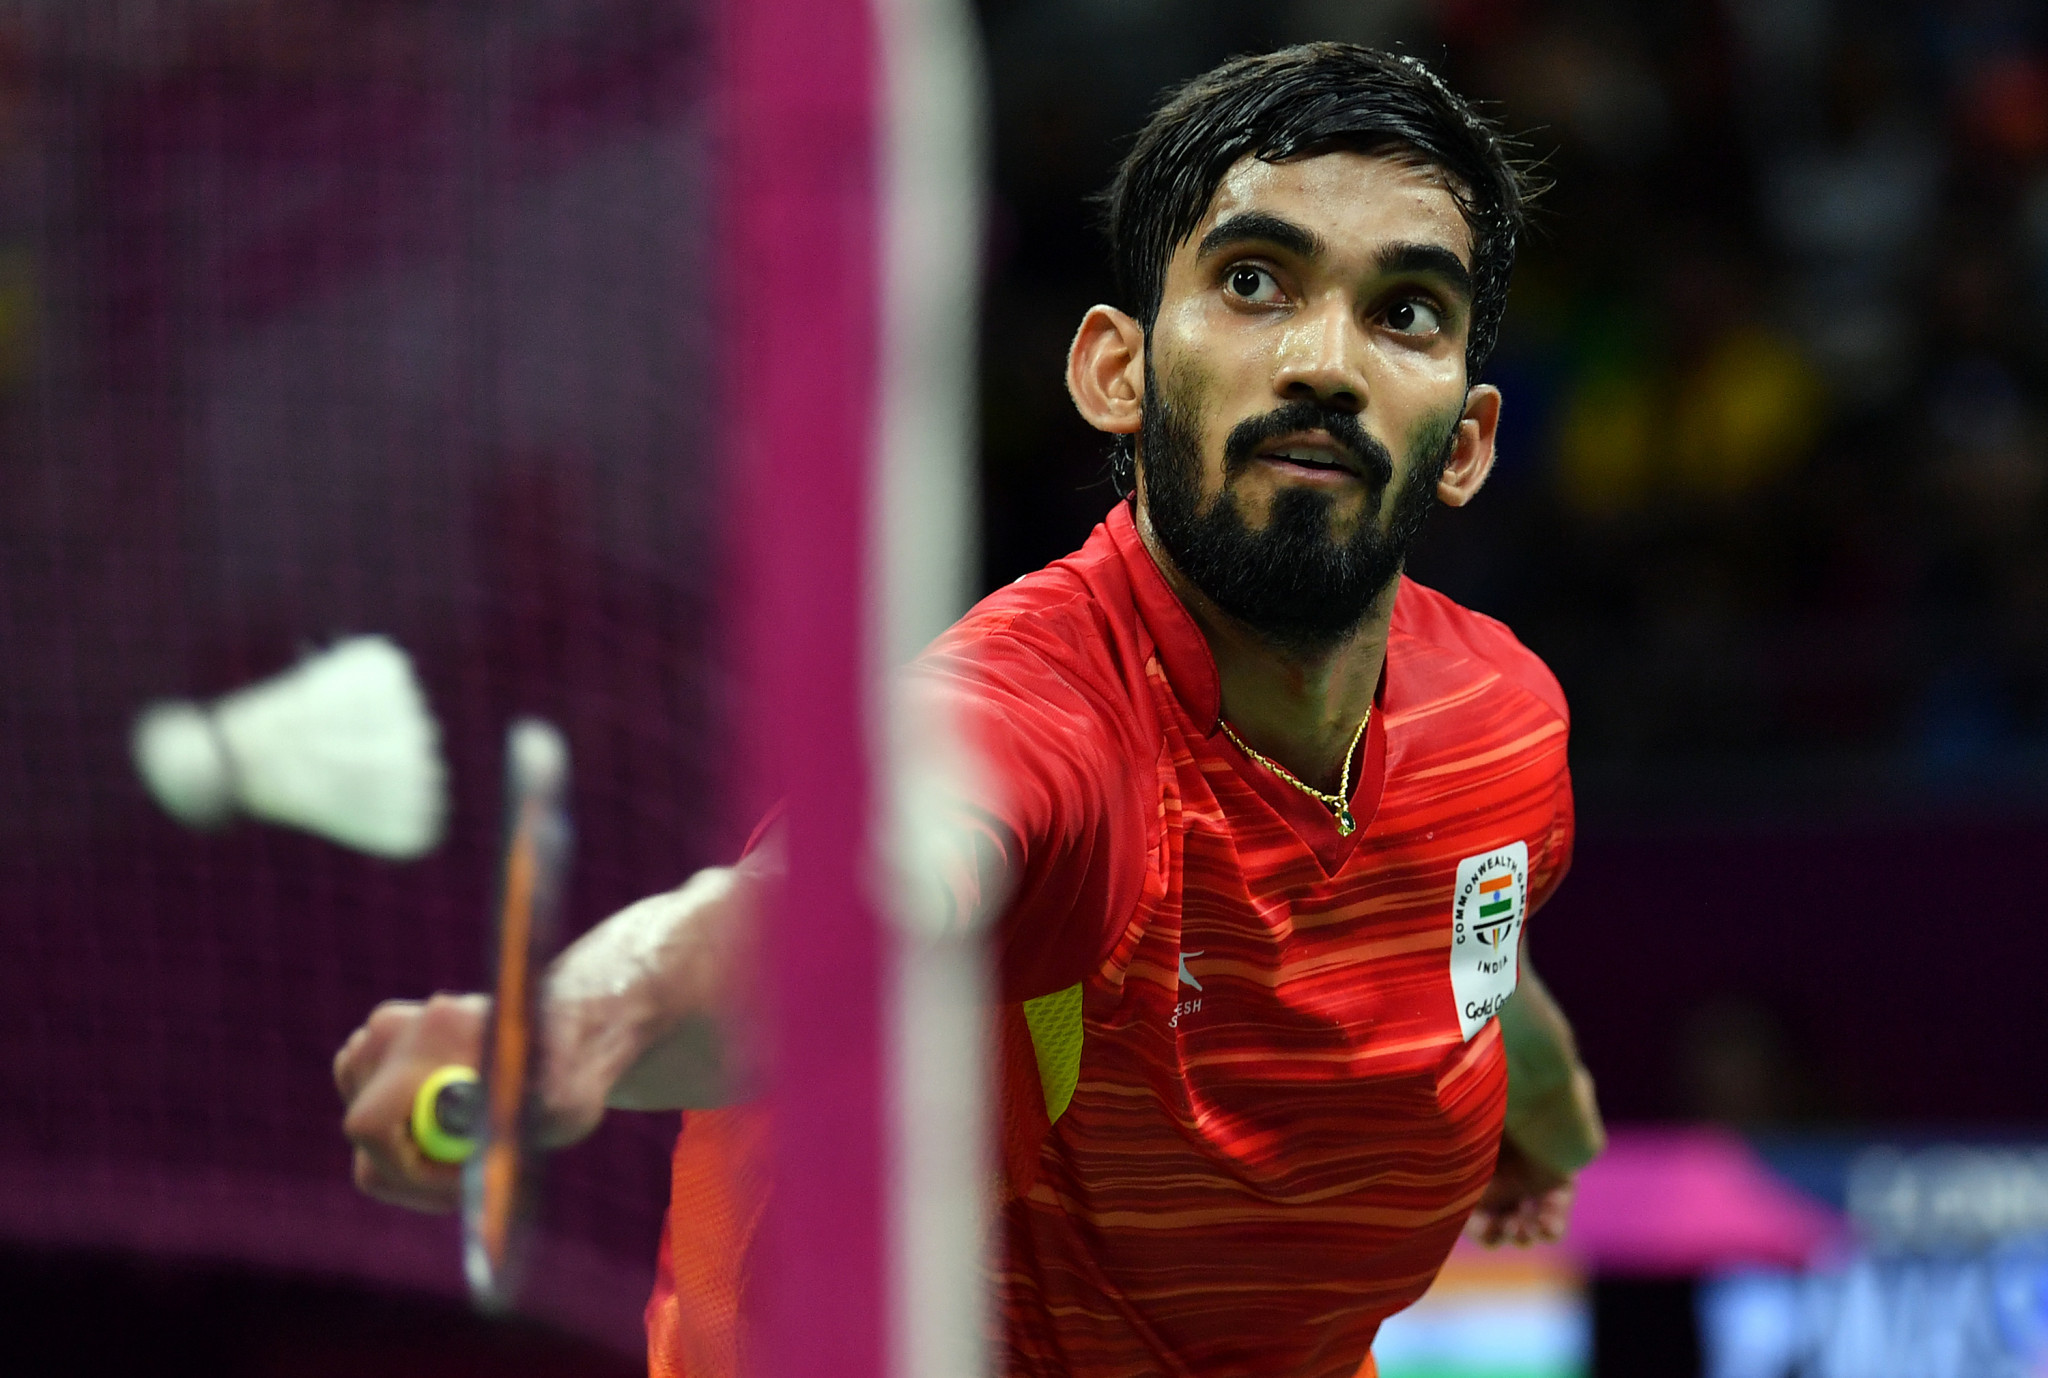 Top seeds through to quarter-finals at Badminton Asia Championships